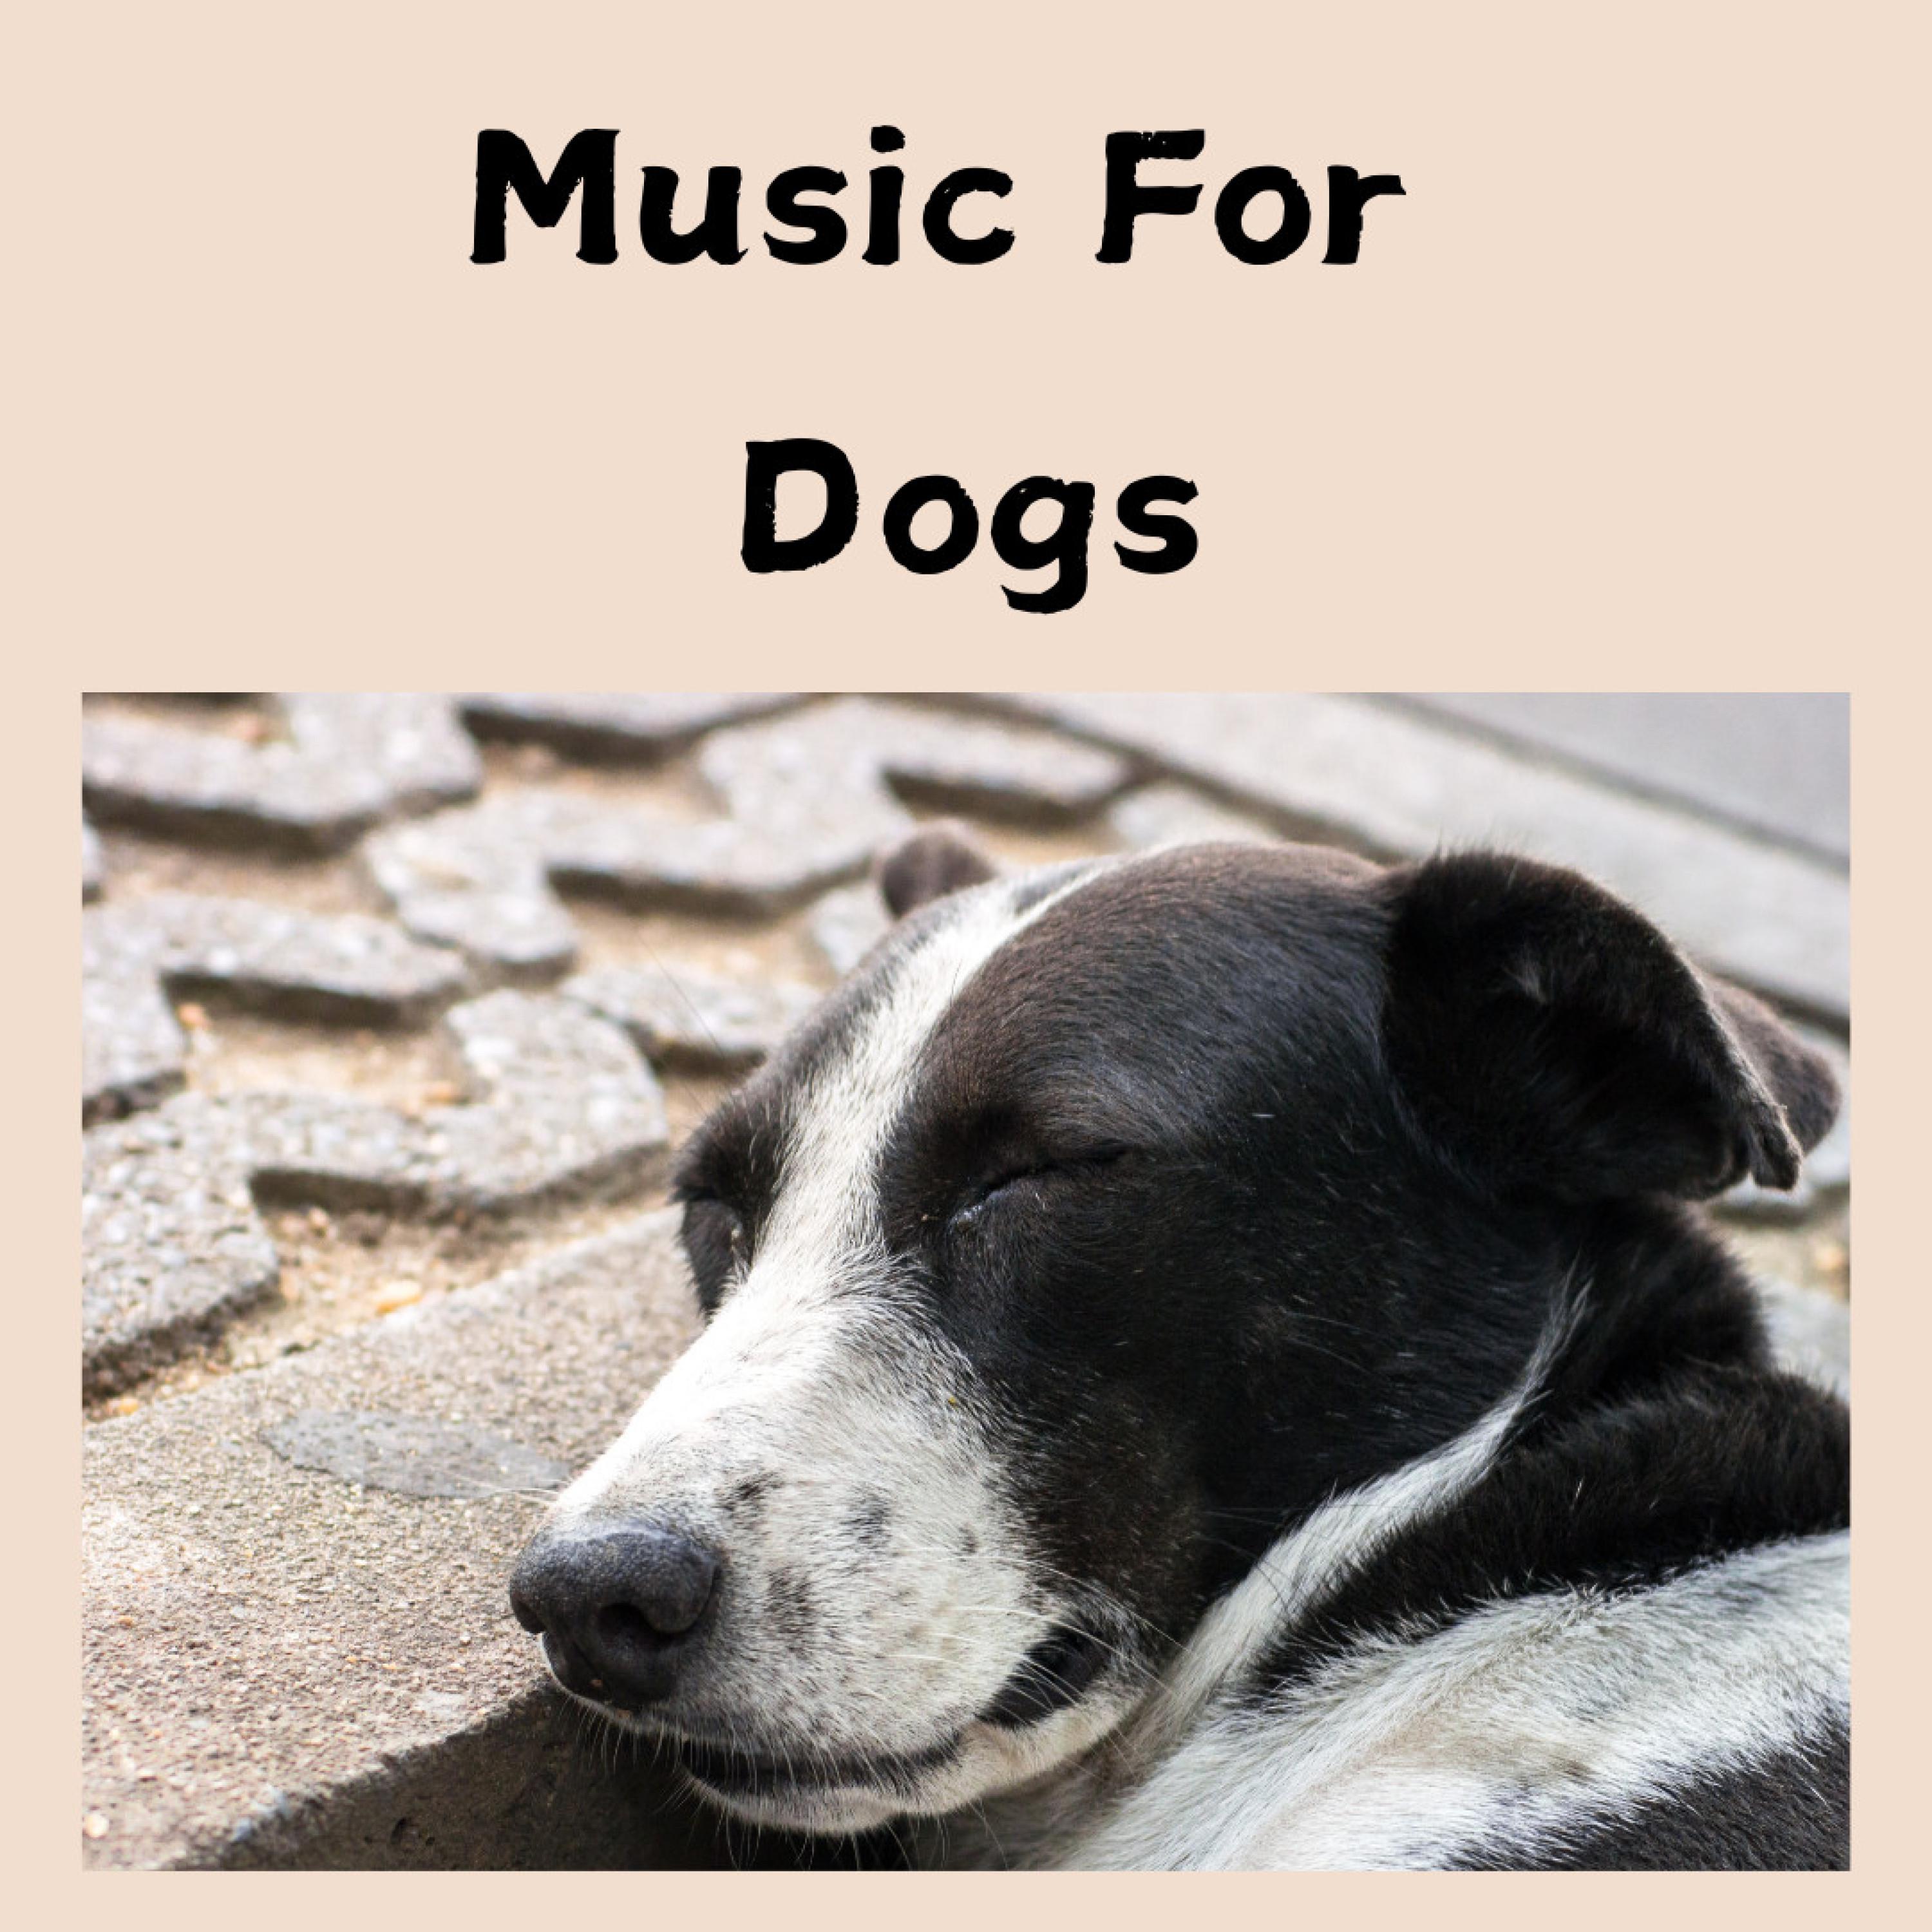 Music For Dogs - Dog Harmony